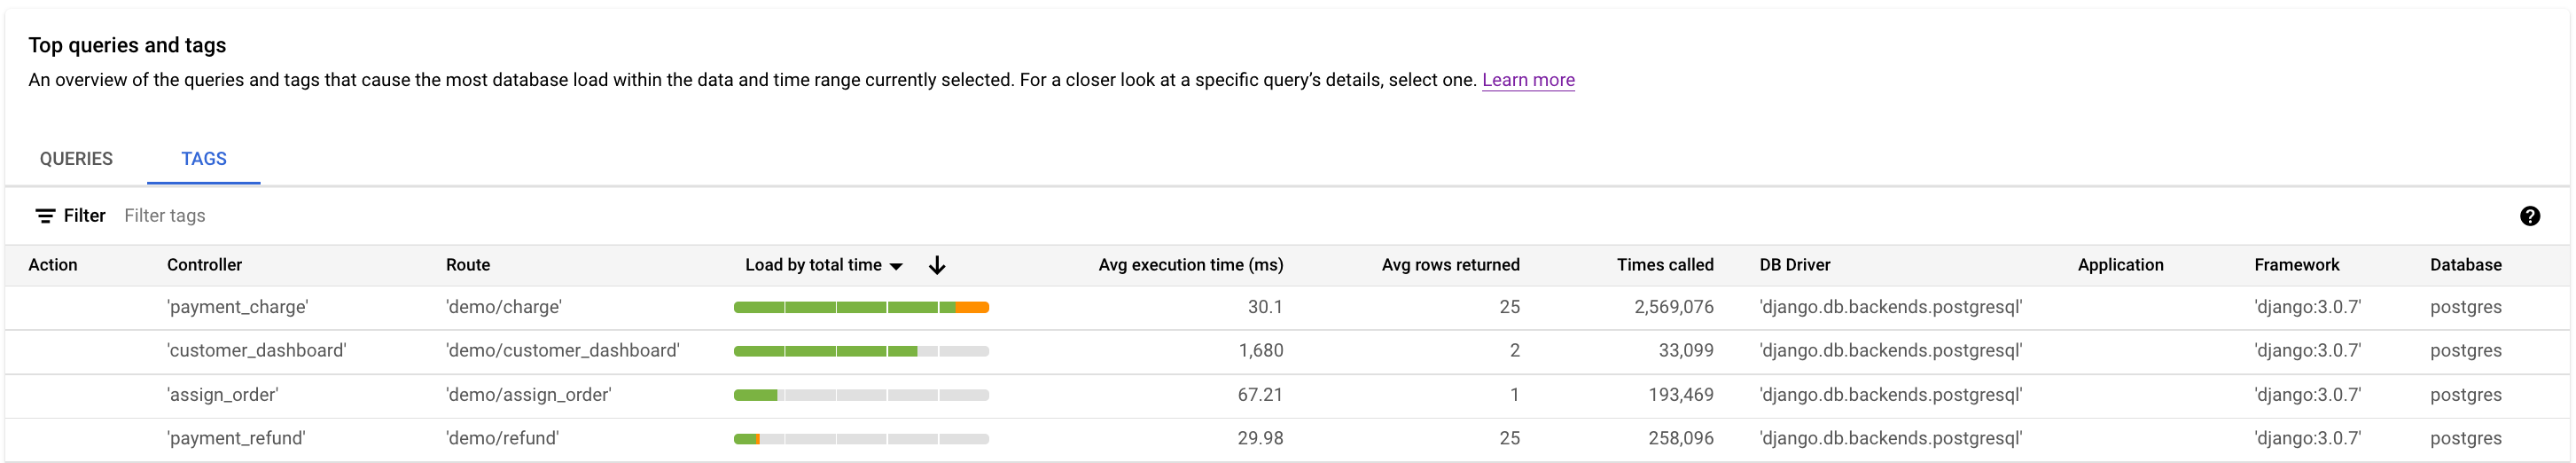 Figure 5 shows the Query Insights dashboard, with load for tags.
         Below the graph is a list of tags.